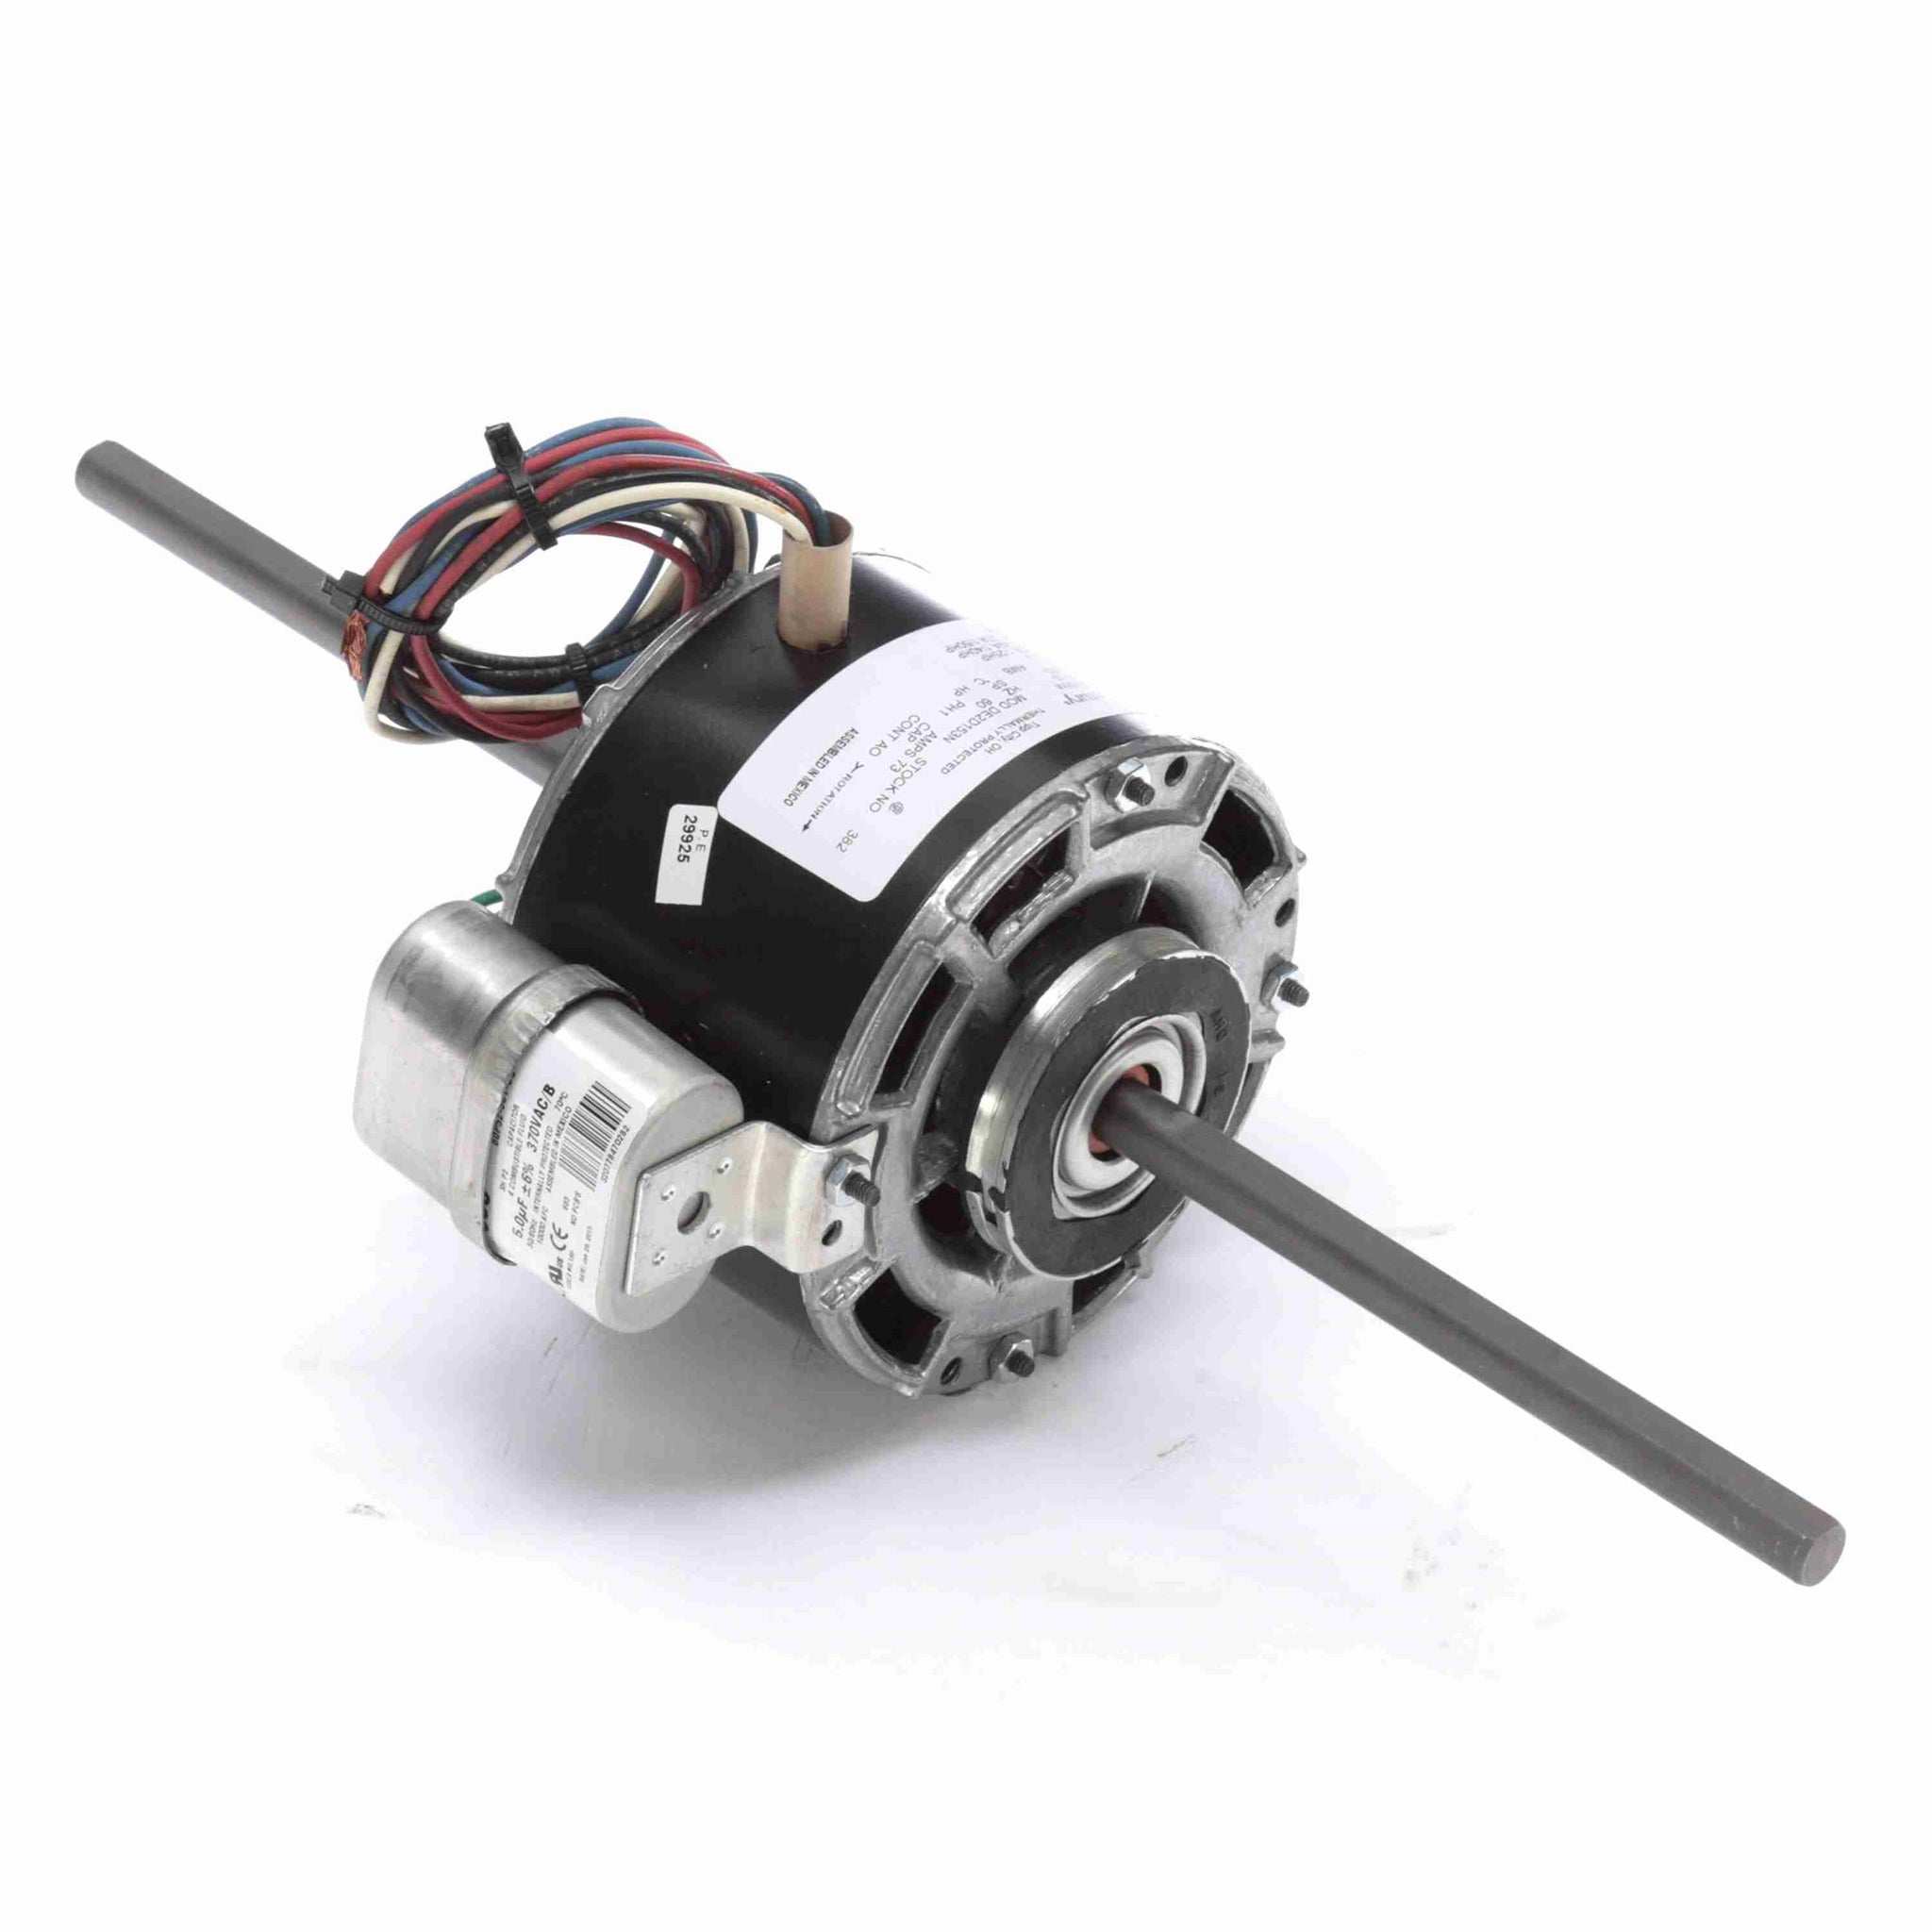 382 -  1/25-14611-1/50 HP Fan Coil / Room Air Conditioner Motor, 1625 RPM, 3 Speed, 115 Volts, 42 Frame, OAO - Hardware & Moreee